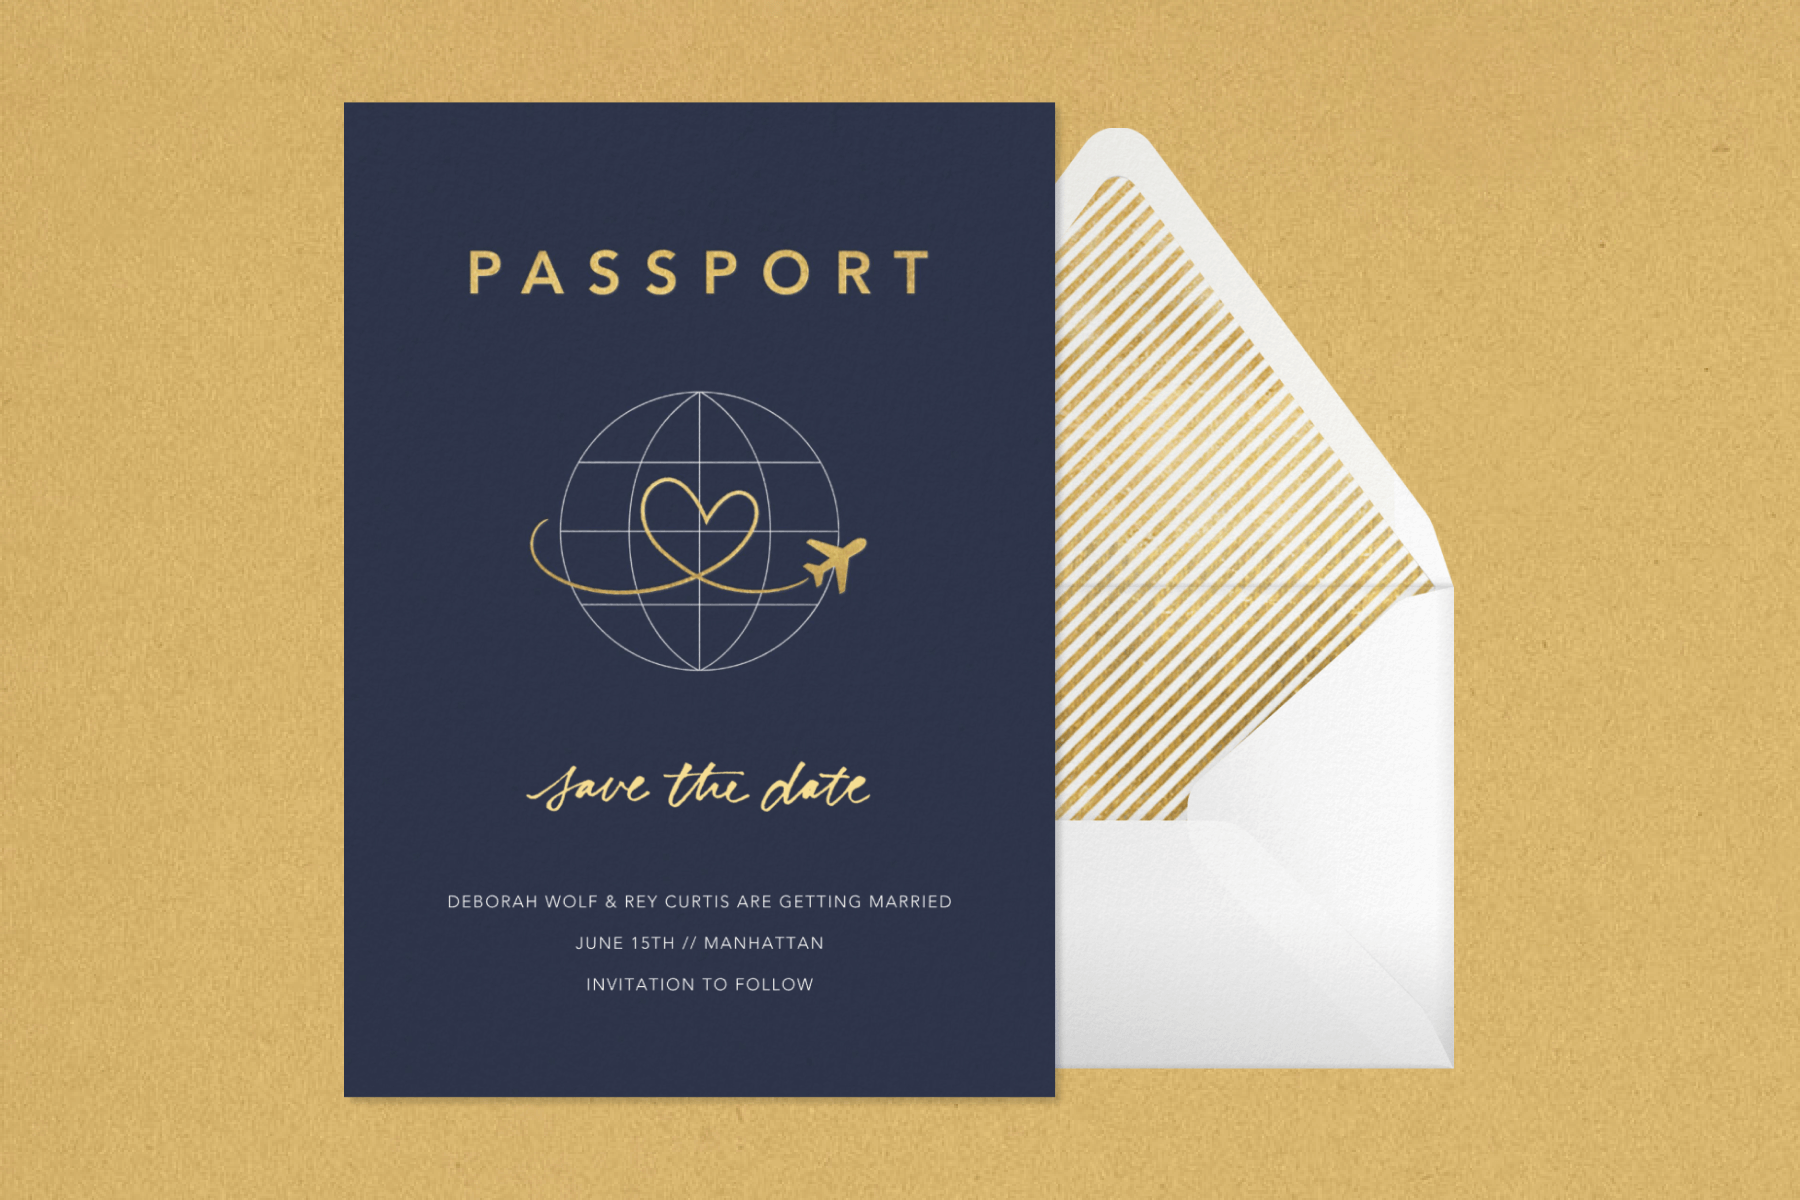 A navy blue save the date with a passport theme and a plain making a heart-shaped trail across the globe.